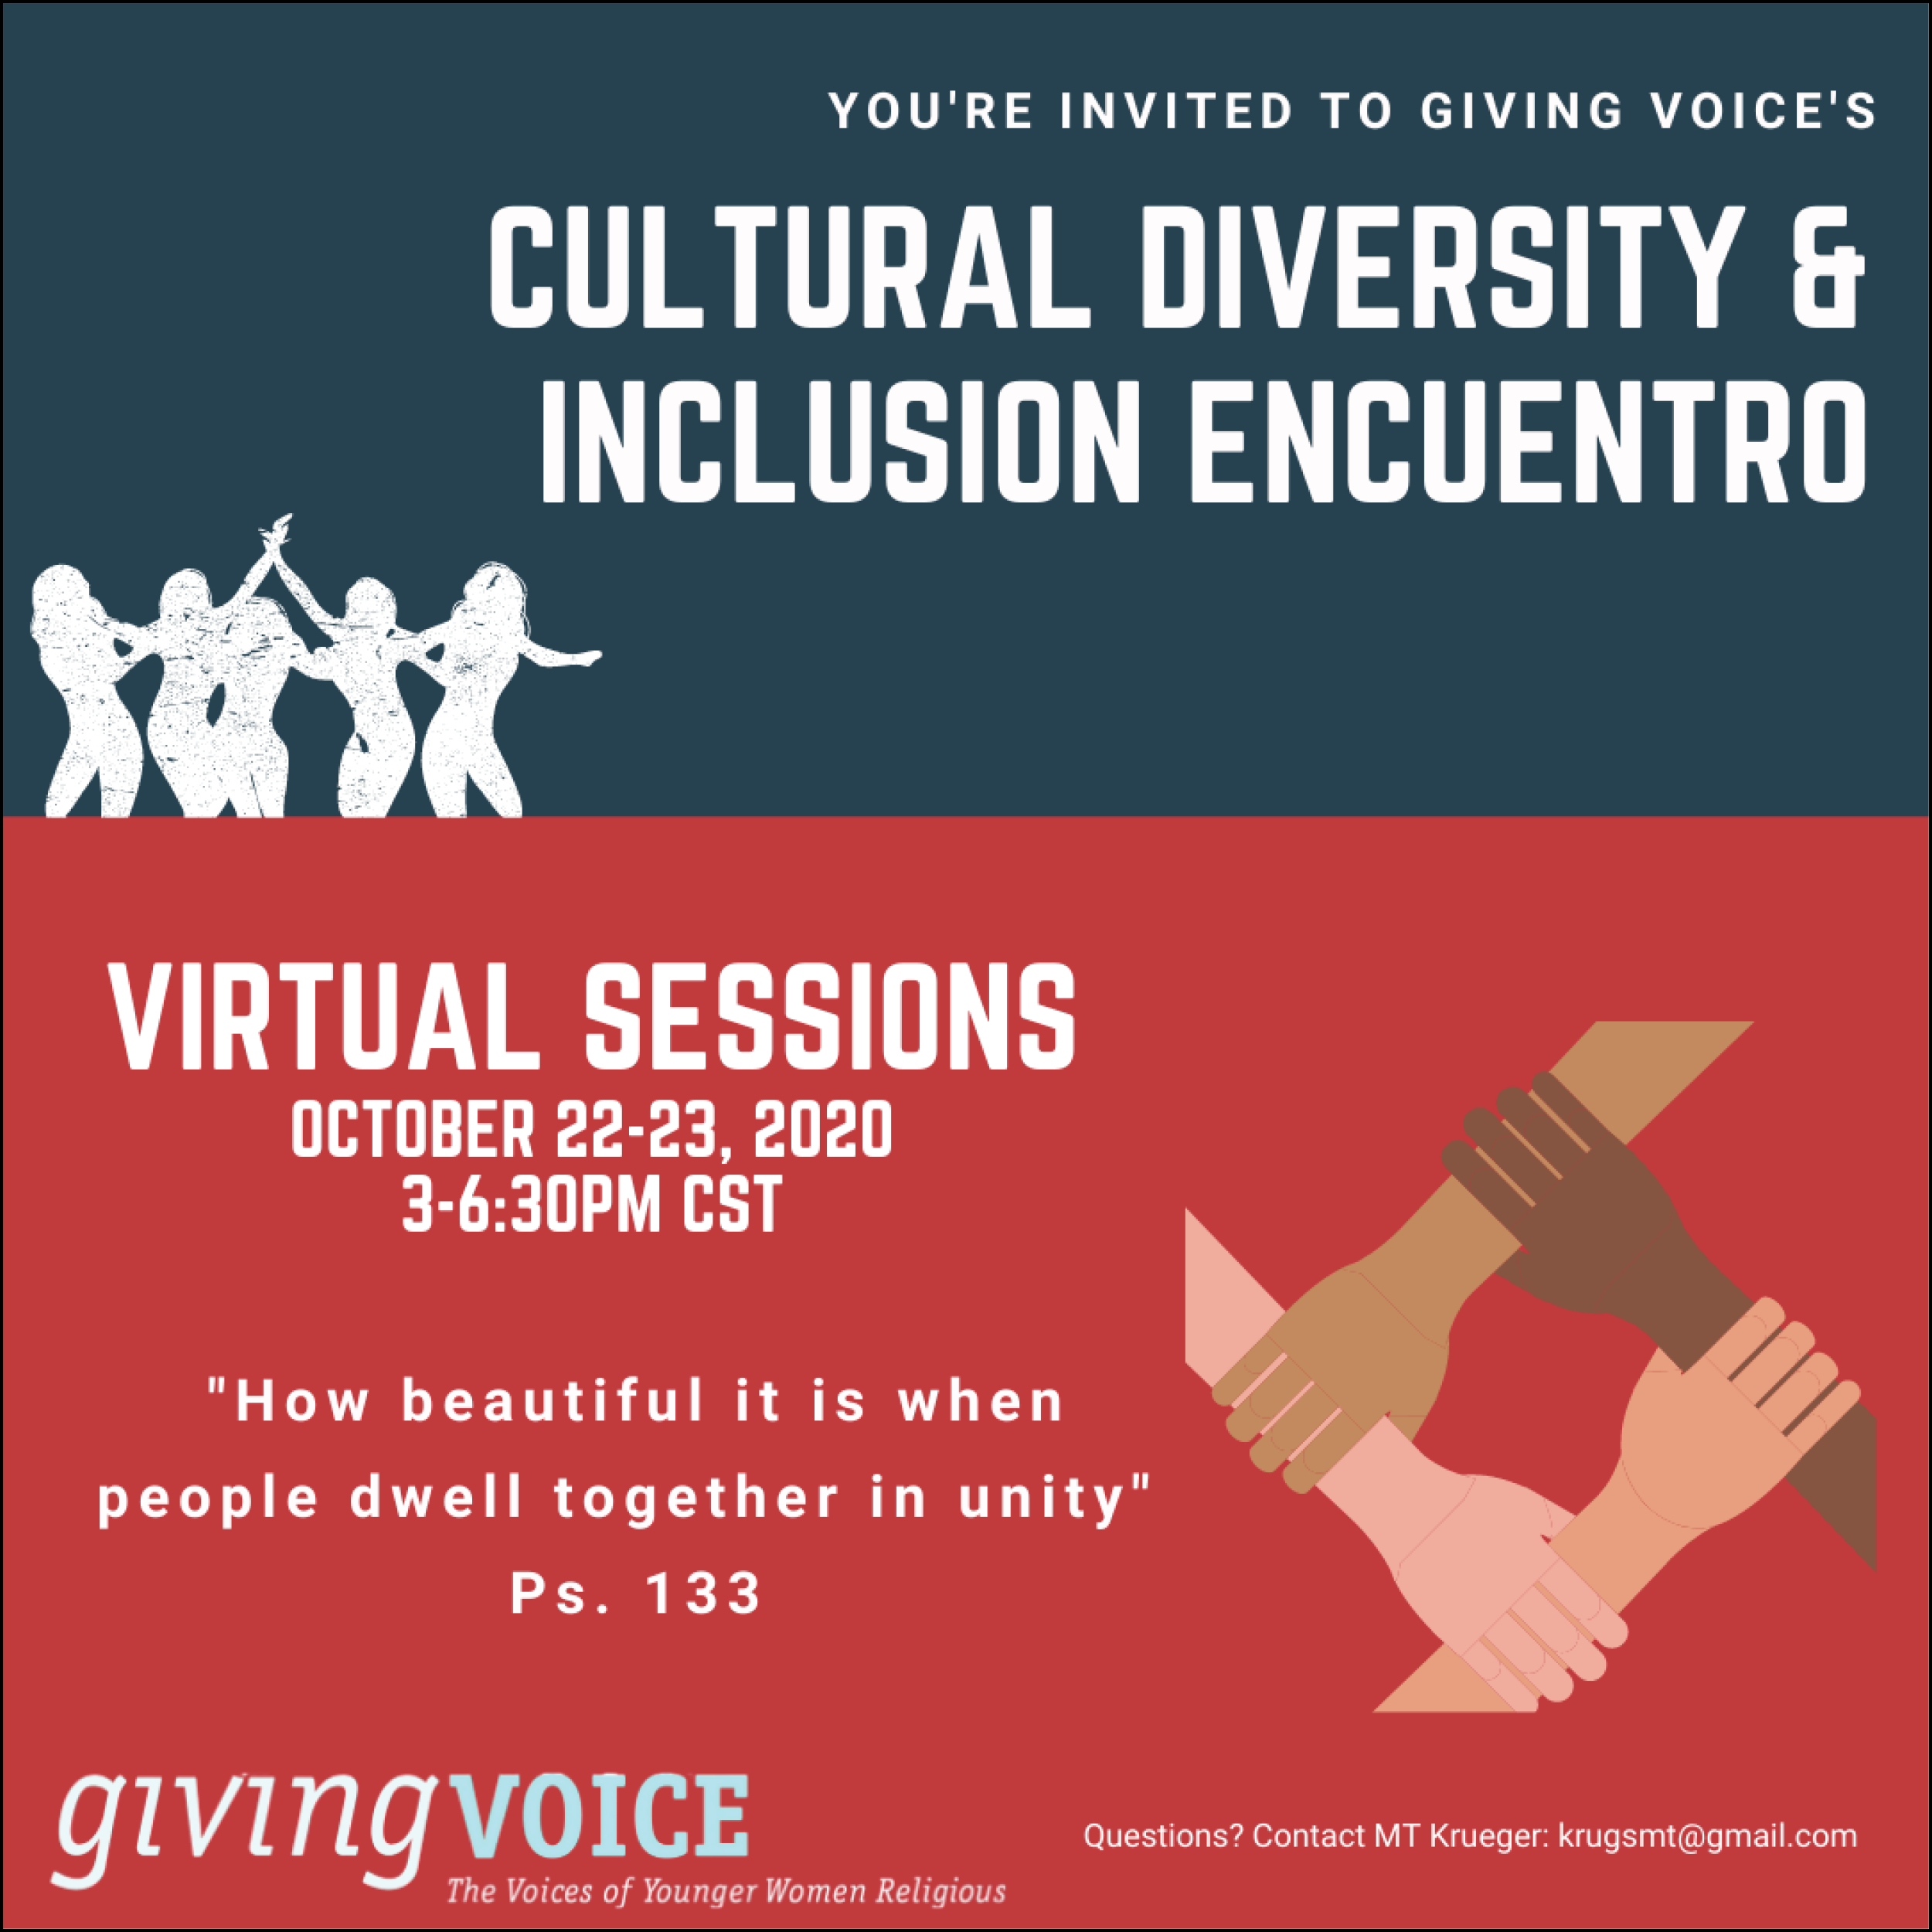 Cultural Diversity and Inclusion Encuentro to be Virtual Meeting